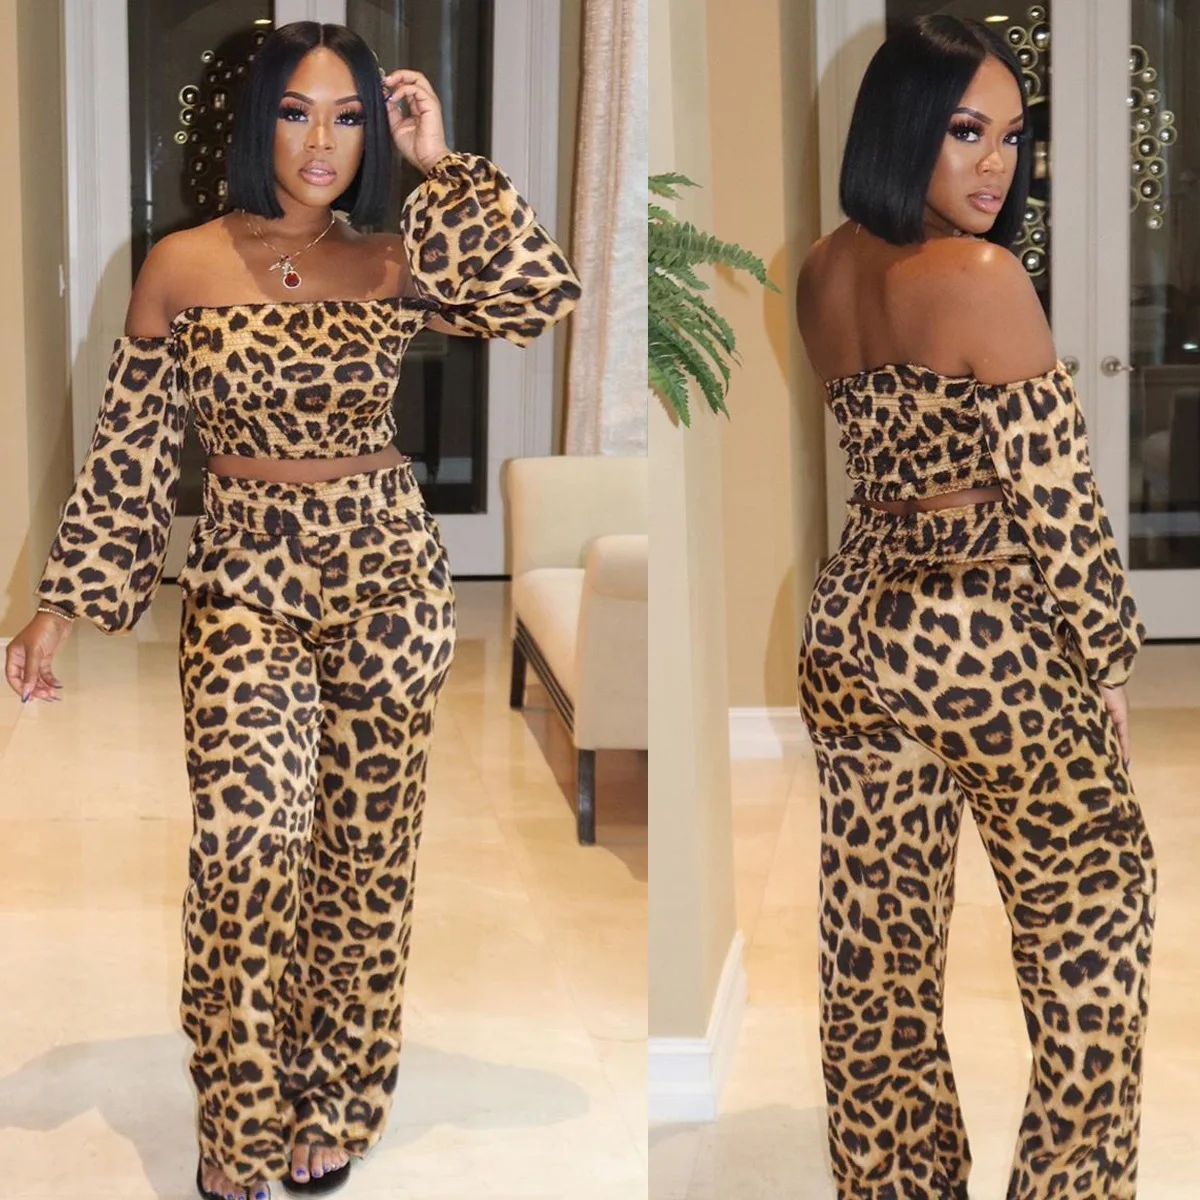 

CL-035 Fashion Plus Size Long Sleeve Tops Leopard Printing 2021 Two Piece Set Women Clothing, As picture show